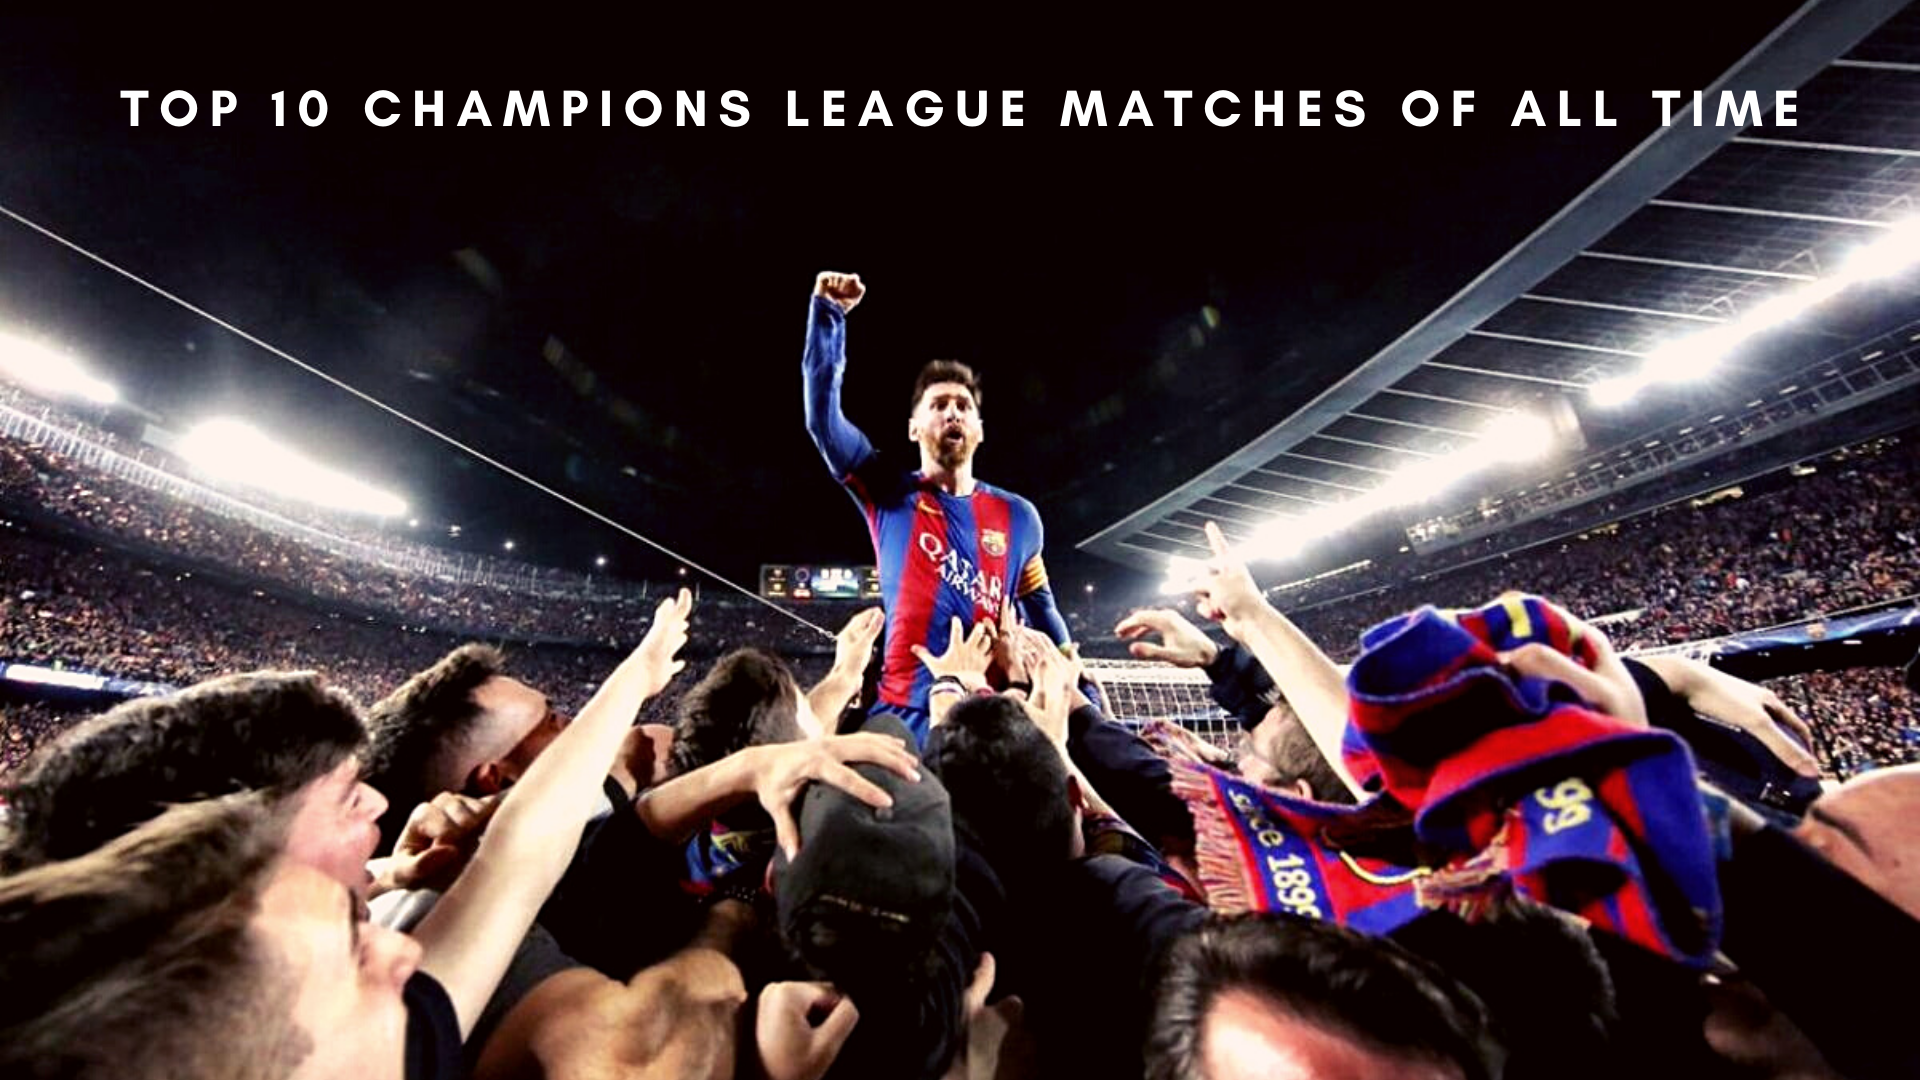 Here is the list of Top 10 Champions League matches of all time. (Credit: FC Barcelona)